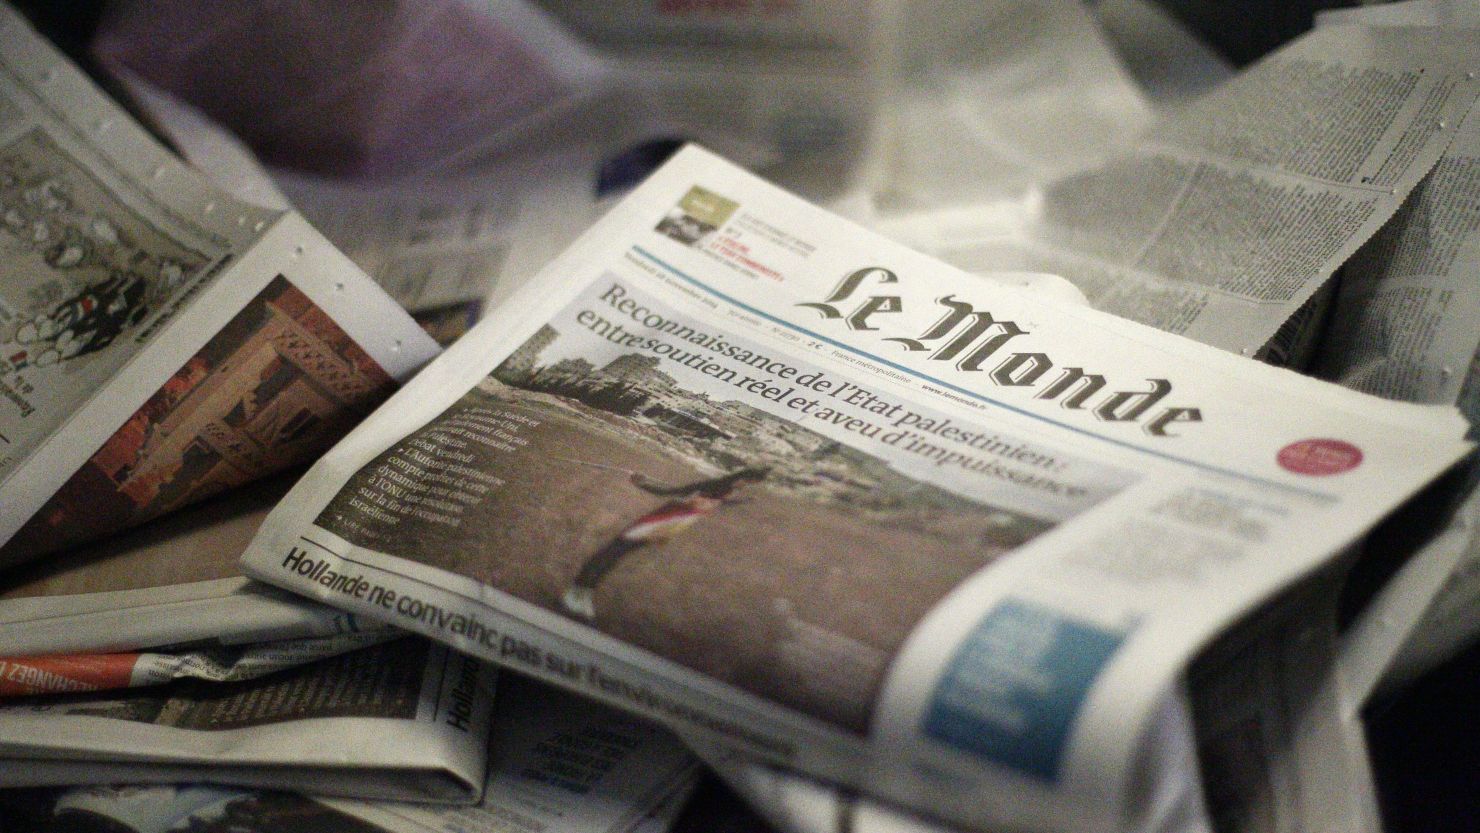 Le Monde is one of several French media outlets that will no longer publish photographs of terrorists.